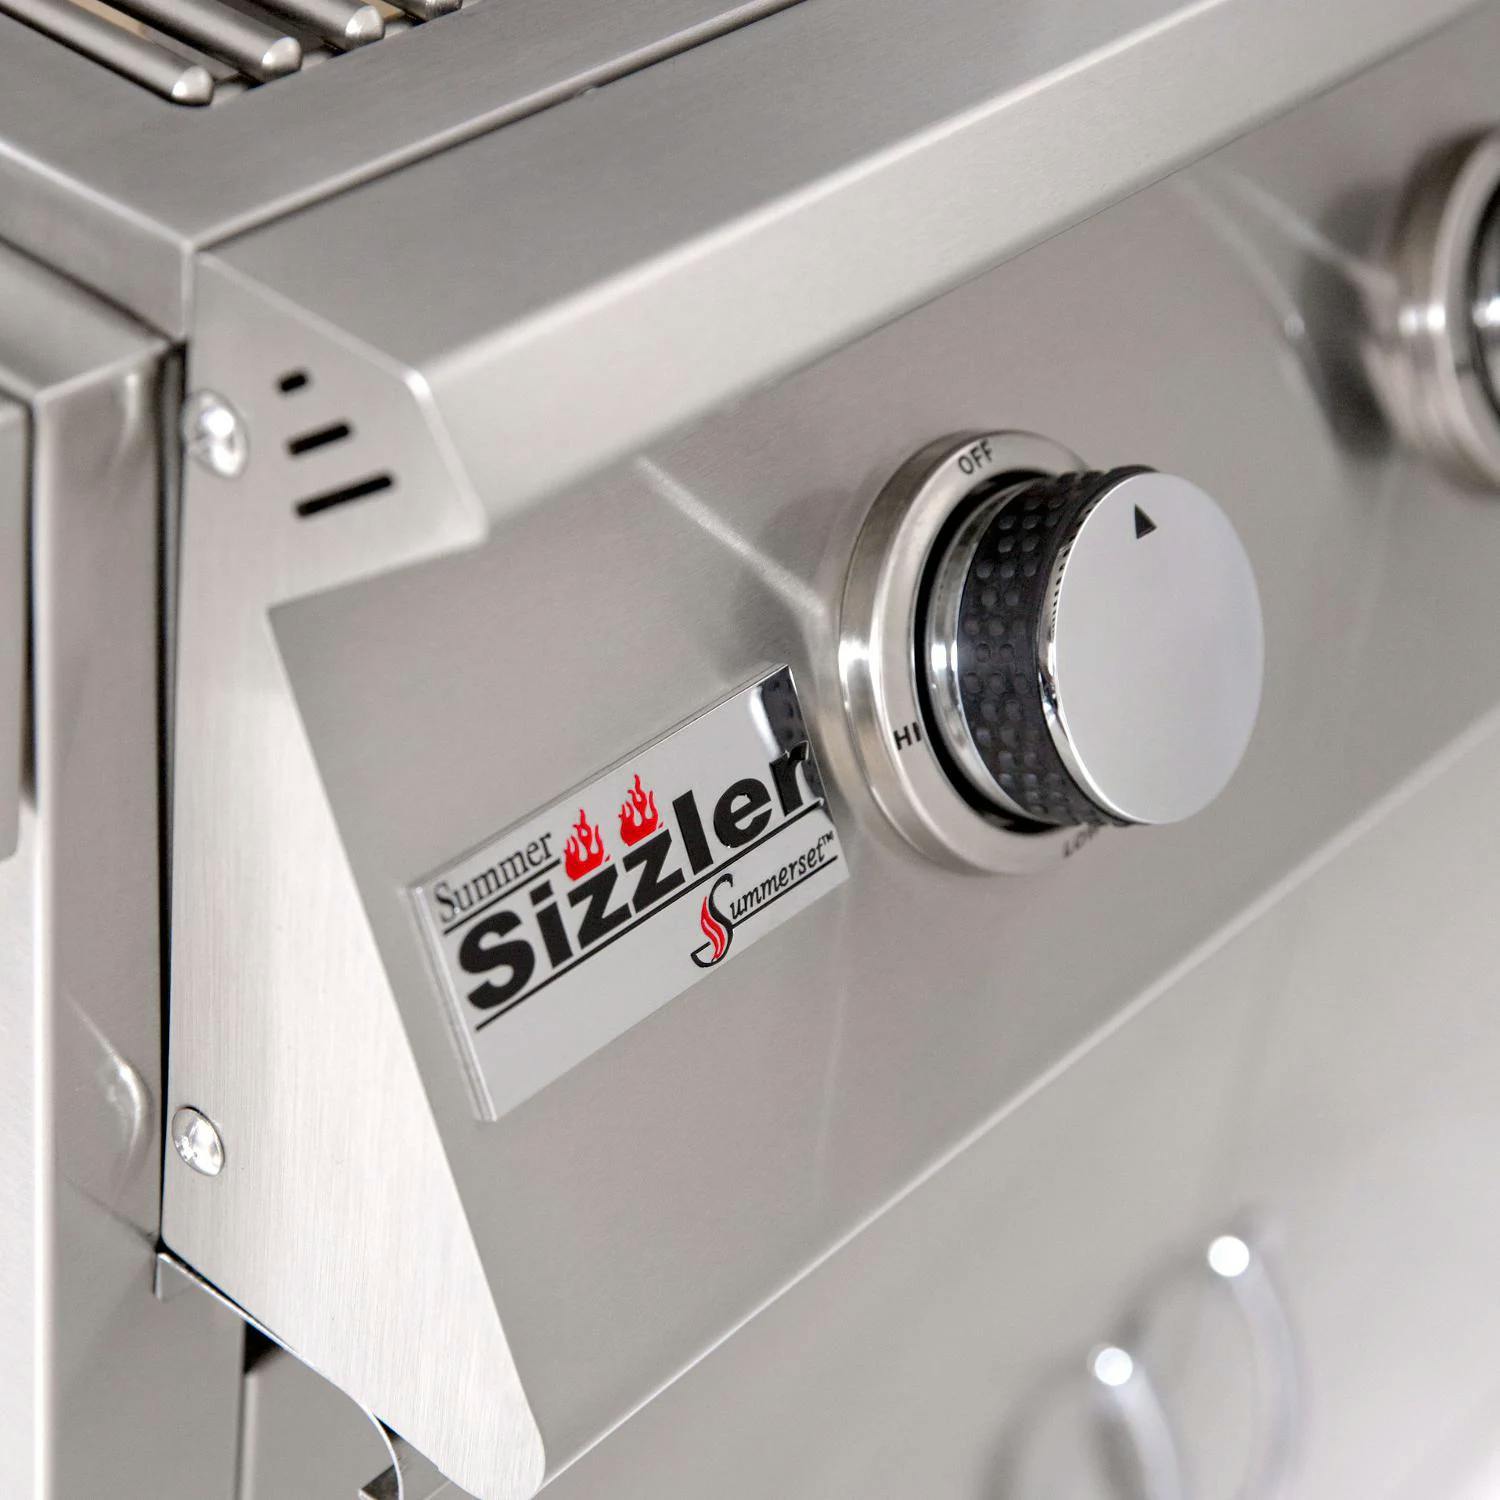 Summerset Sizzler 3-Burner Built-In Gas Grill · 26 in. · Natural